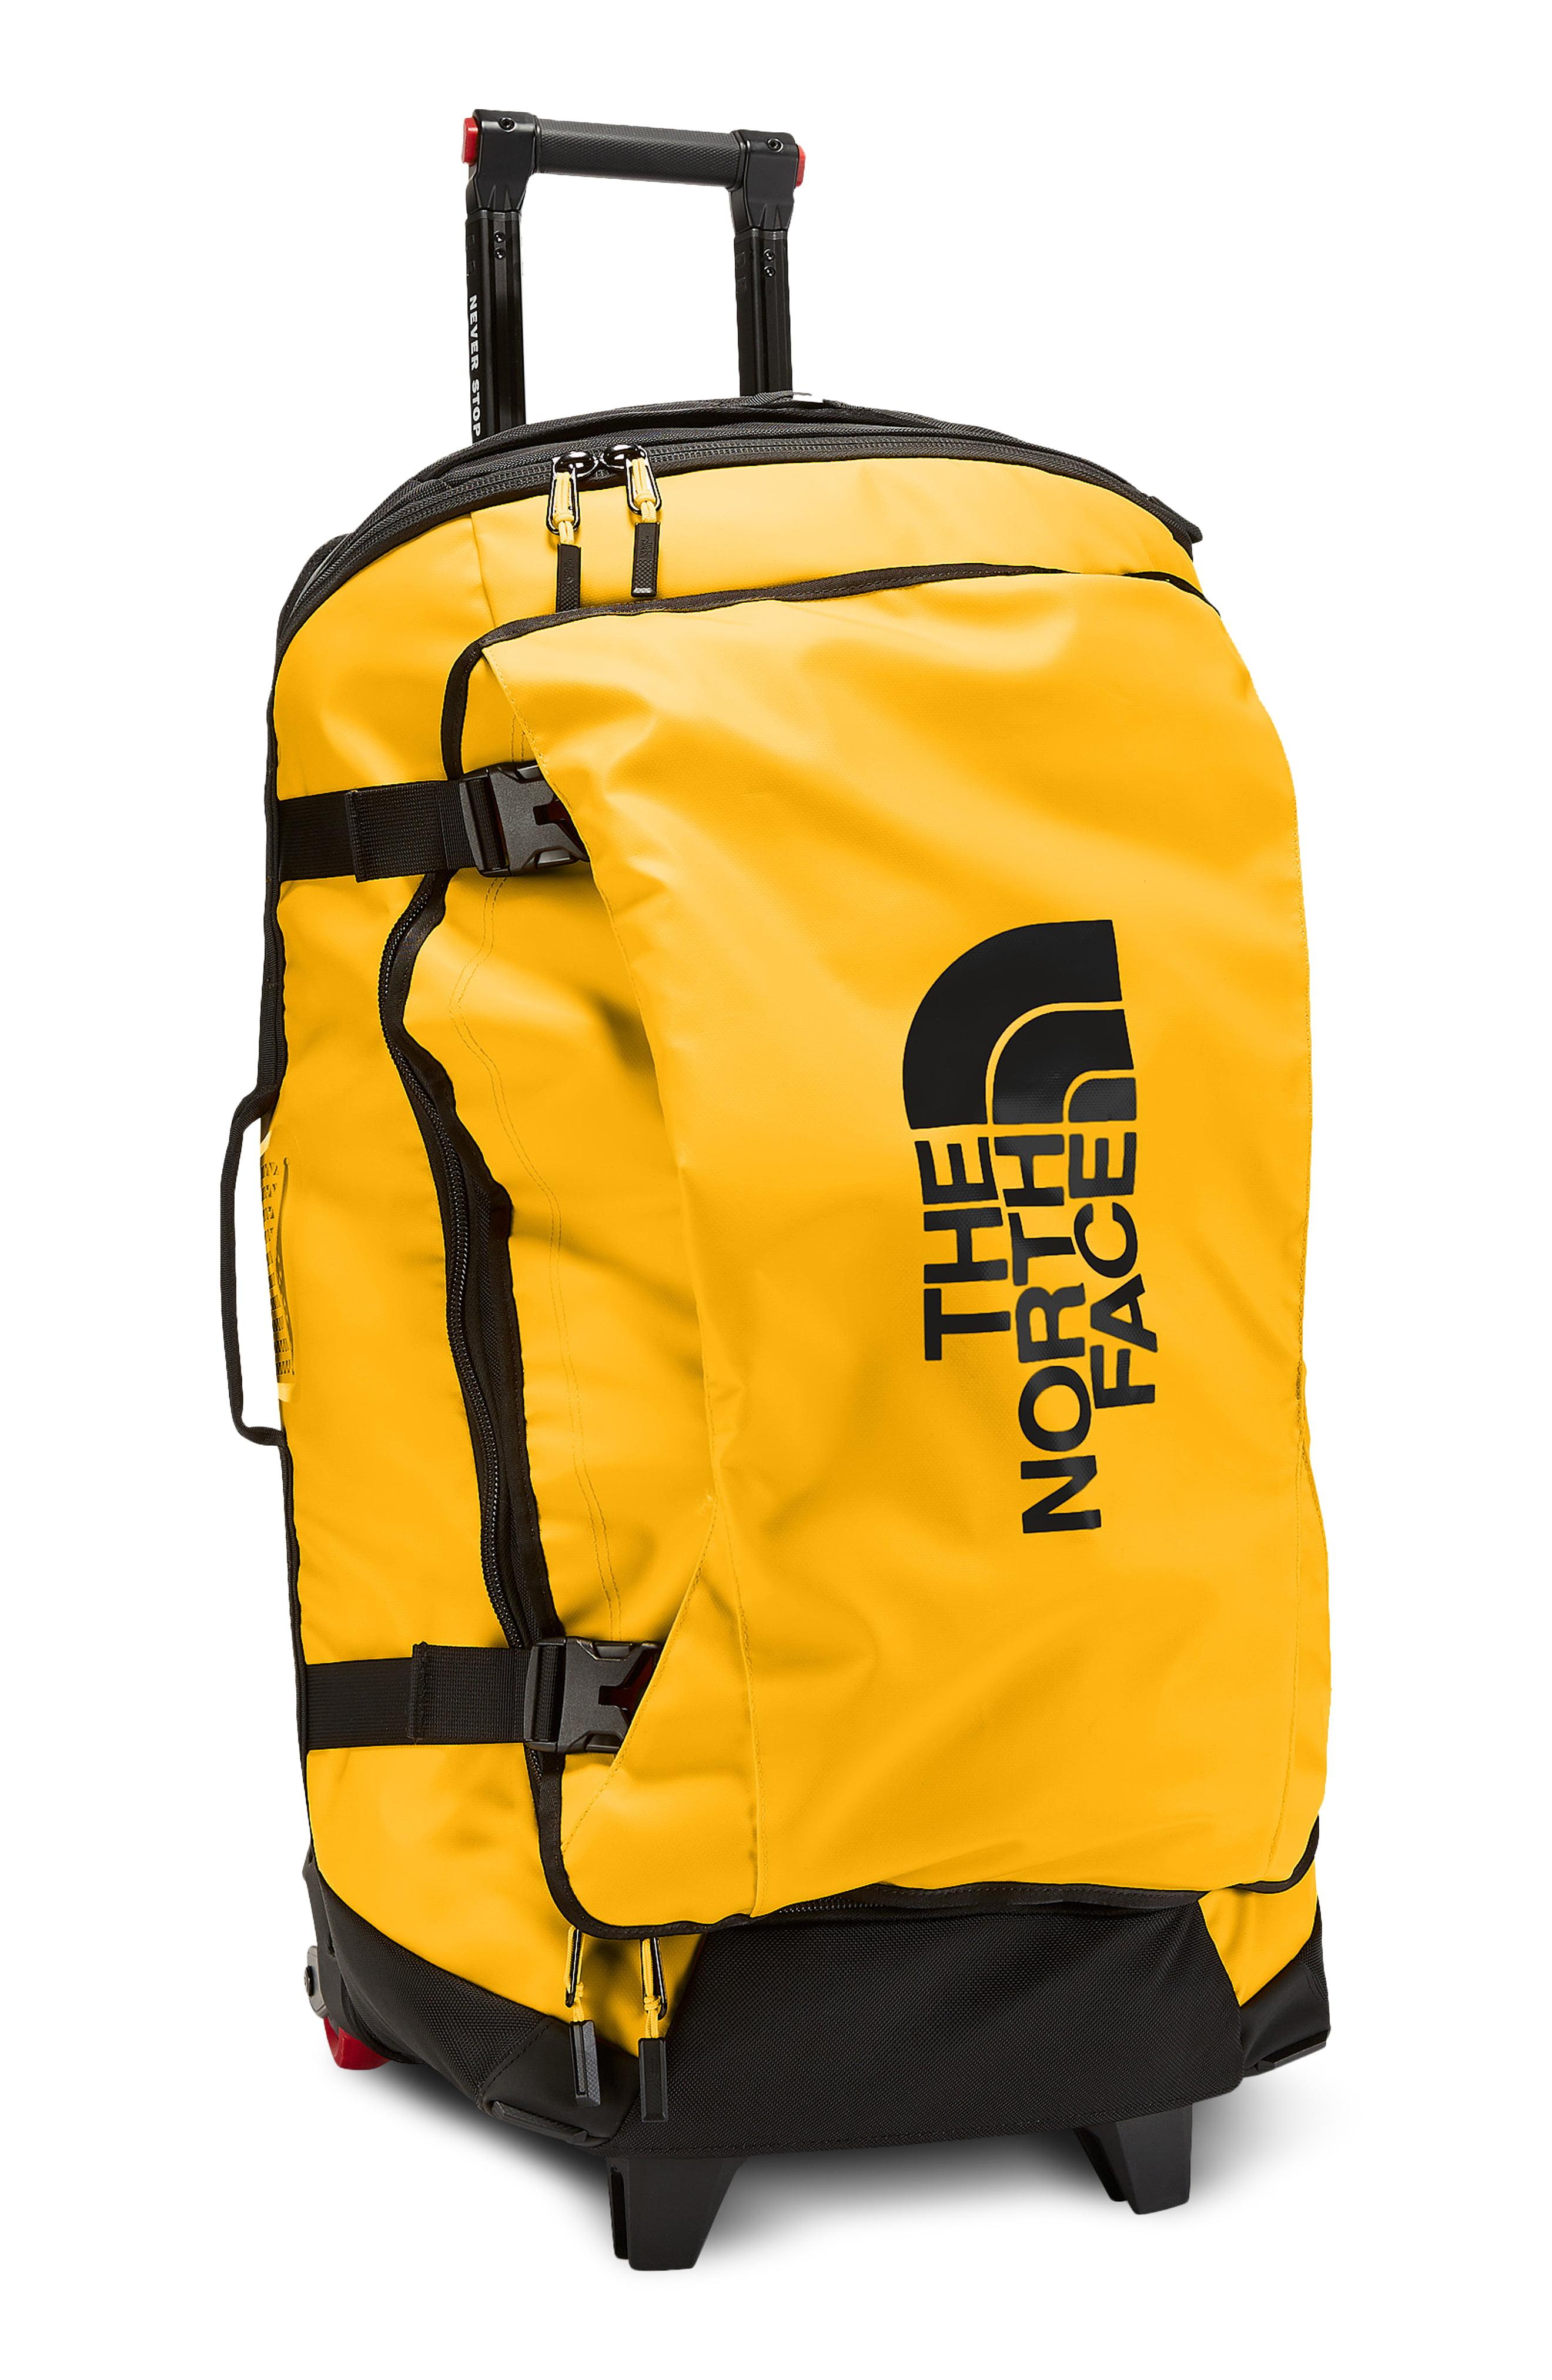 travel the north face duffel bag